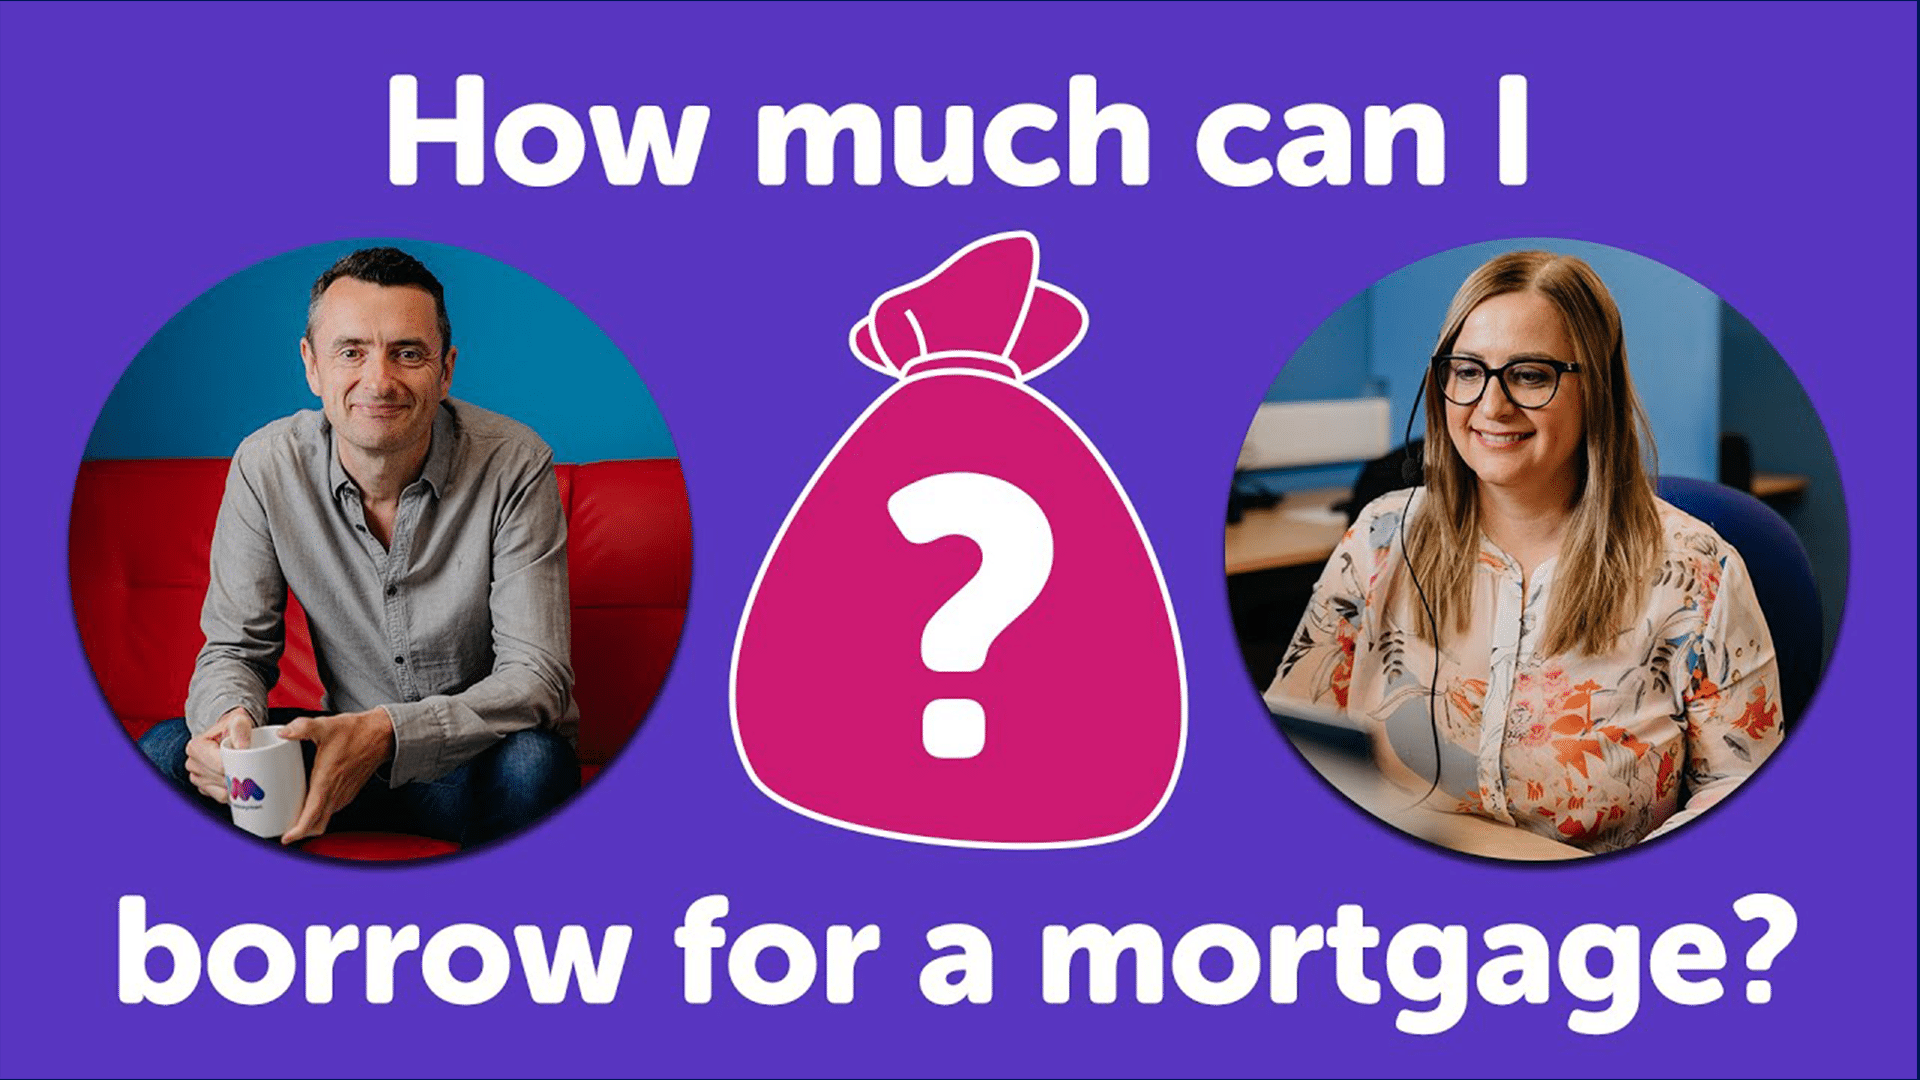 How Much Can I Borrow For A Mortgage in Newcastle?